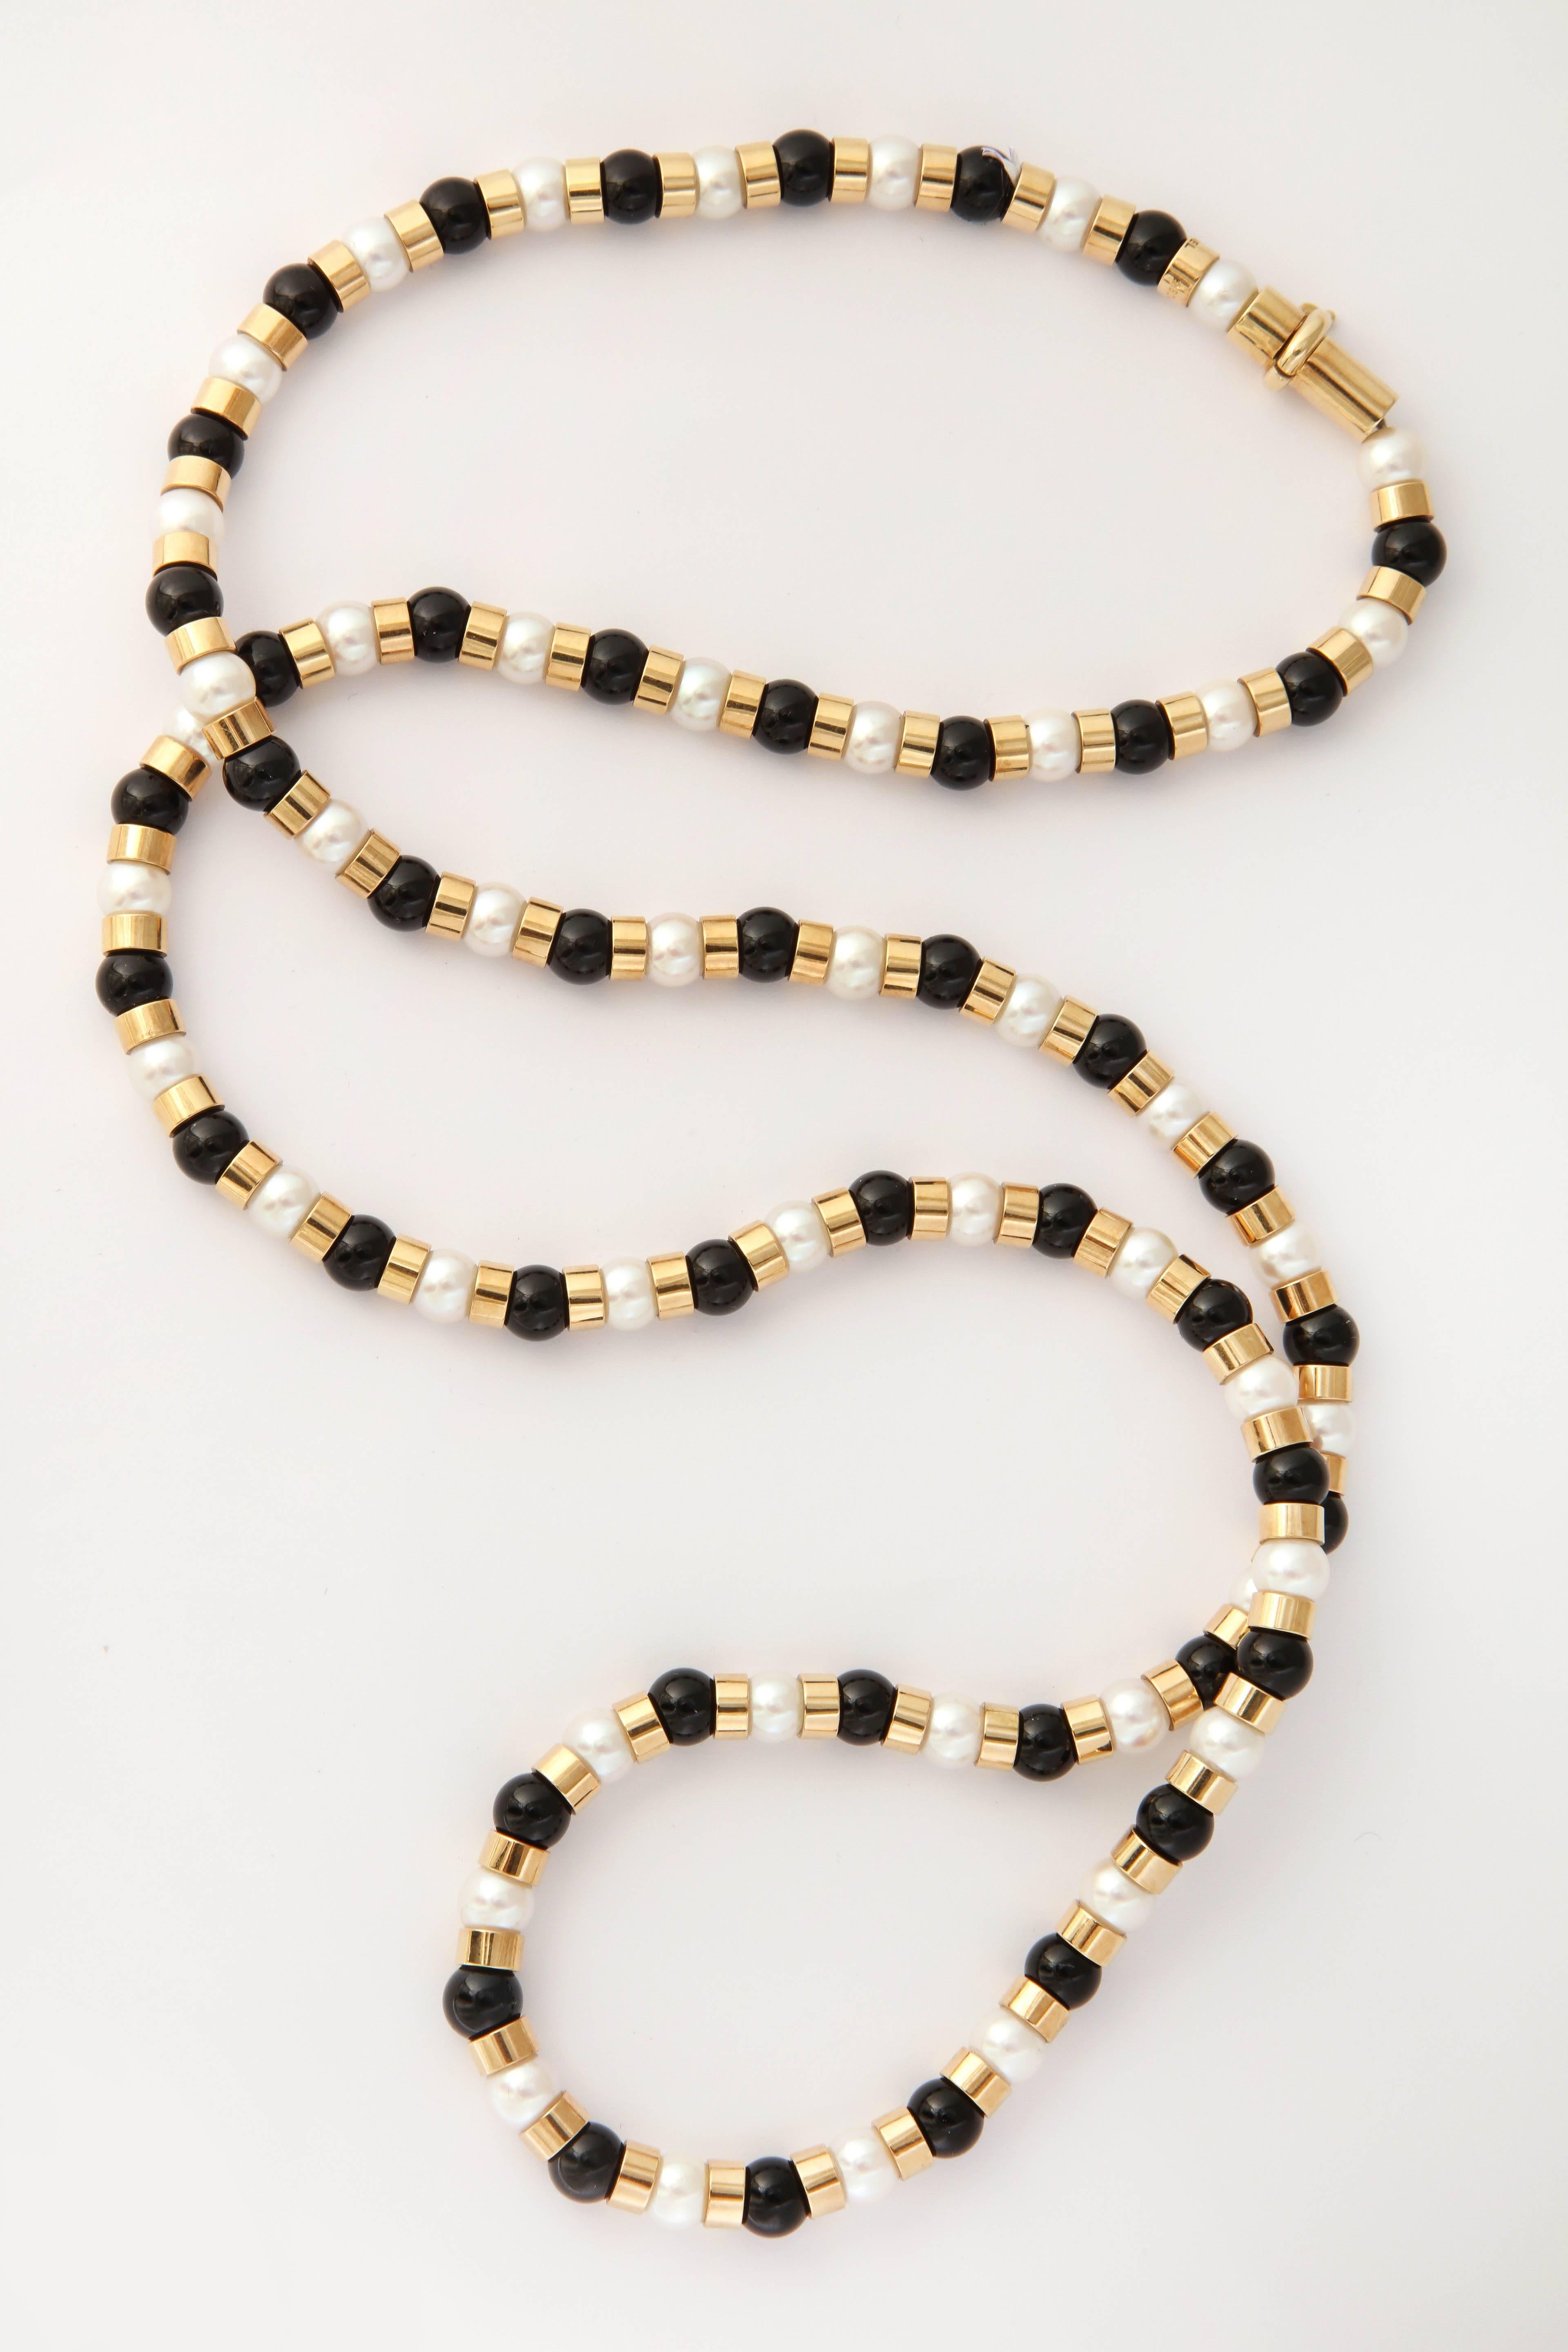 One Ladies Alternating Onyx Ball And Cultured Pearl Necklace Designed By Chanel Paris In The 1990's. Each Onyx And Pearl Measuring Approximately 7 Mm Each .47 onyxes In Total And 48 White Cultured Pearls In Total. Necklace Further Embellished With